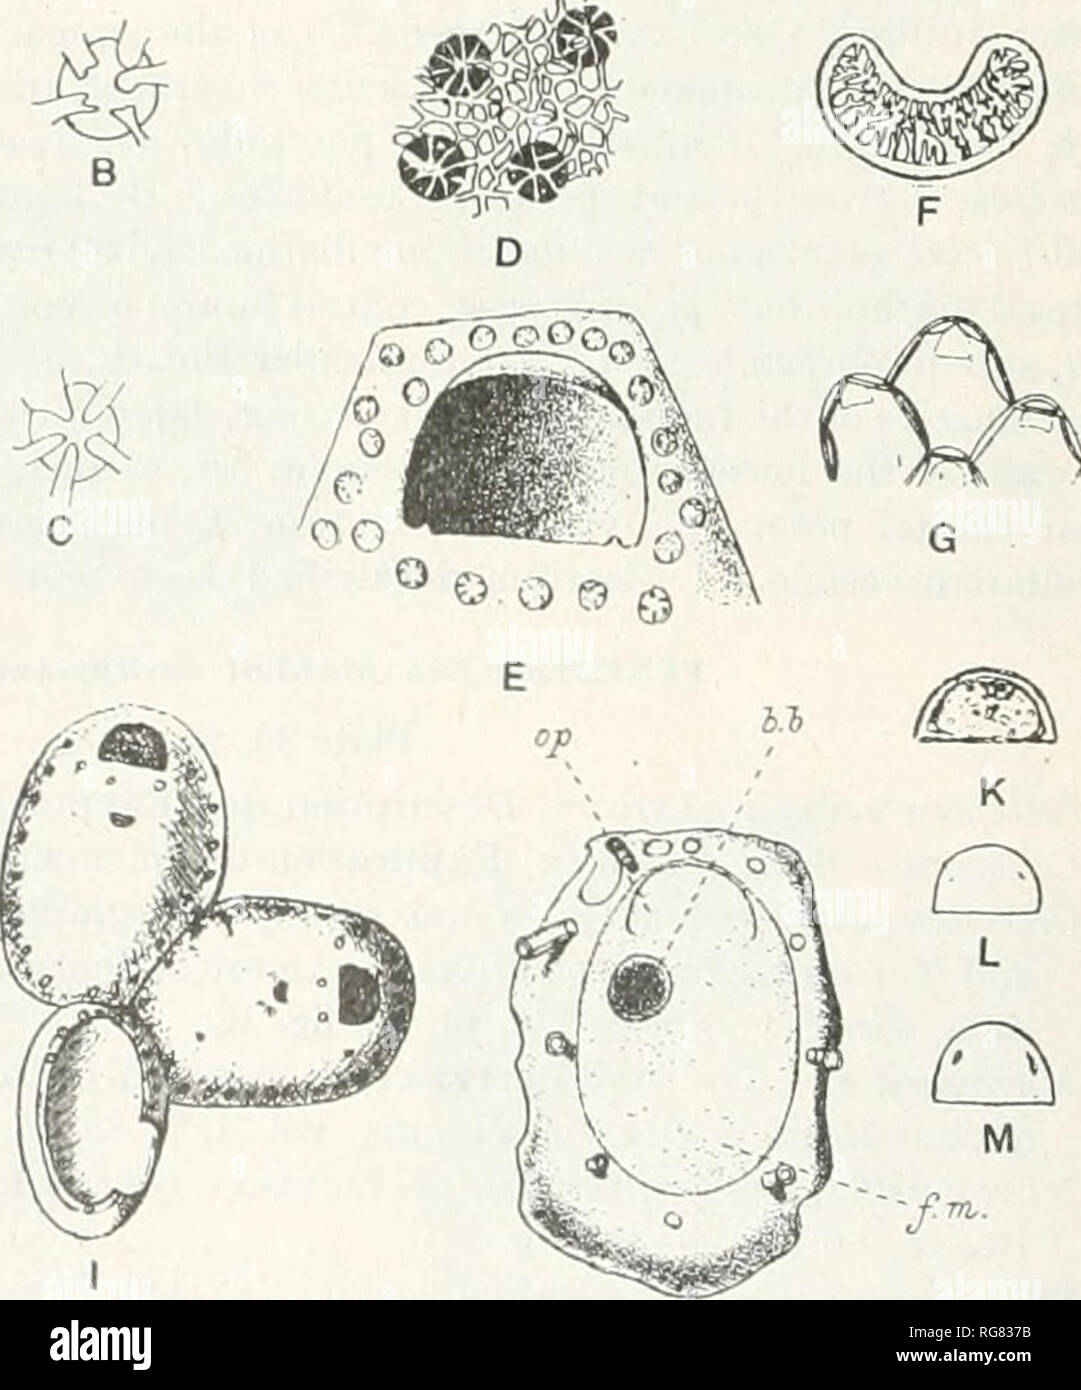 . Bulletin - United States National Museum. Science. Fig. 19.—Genus Fenestrulina Jullien, 1888. A-J. FeneslruliTM malusi Savigny Audouin, 1826. A. A zooecium X 50 showing all the Gbaracters. B, C. Stellate frontal pores, X 250. (A-C, after Waters, 1903.) D. Portion of surface of a zooecium, X 175. E. Aperture, X 100. (After Levinsen, 1909.) F. Detailed structure of the ascopore (fenes- trule of Julhen) X 175. G. Dorsal face of the zooecia, showing the dietellae X 18. H. Zooecia X 21, several showing the ovicell. (D, F-H, after Levinsen, 1894.) I. Ancestrula and ancestrular zooecia, X 2o. J. An Stock Photo